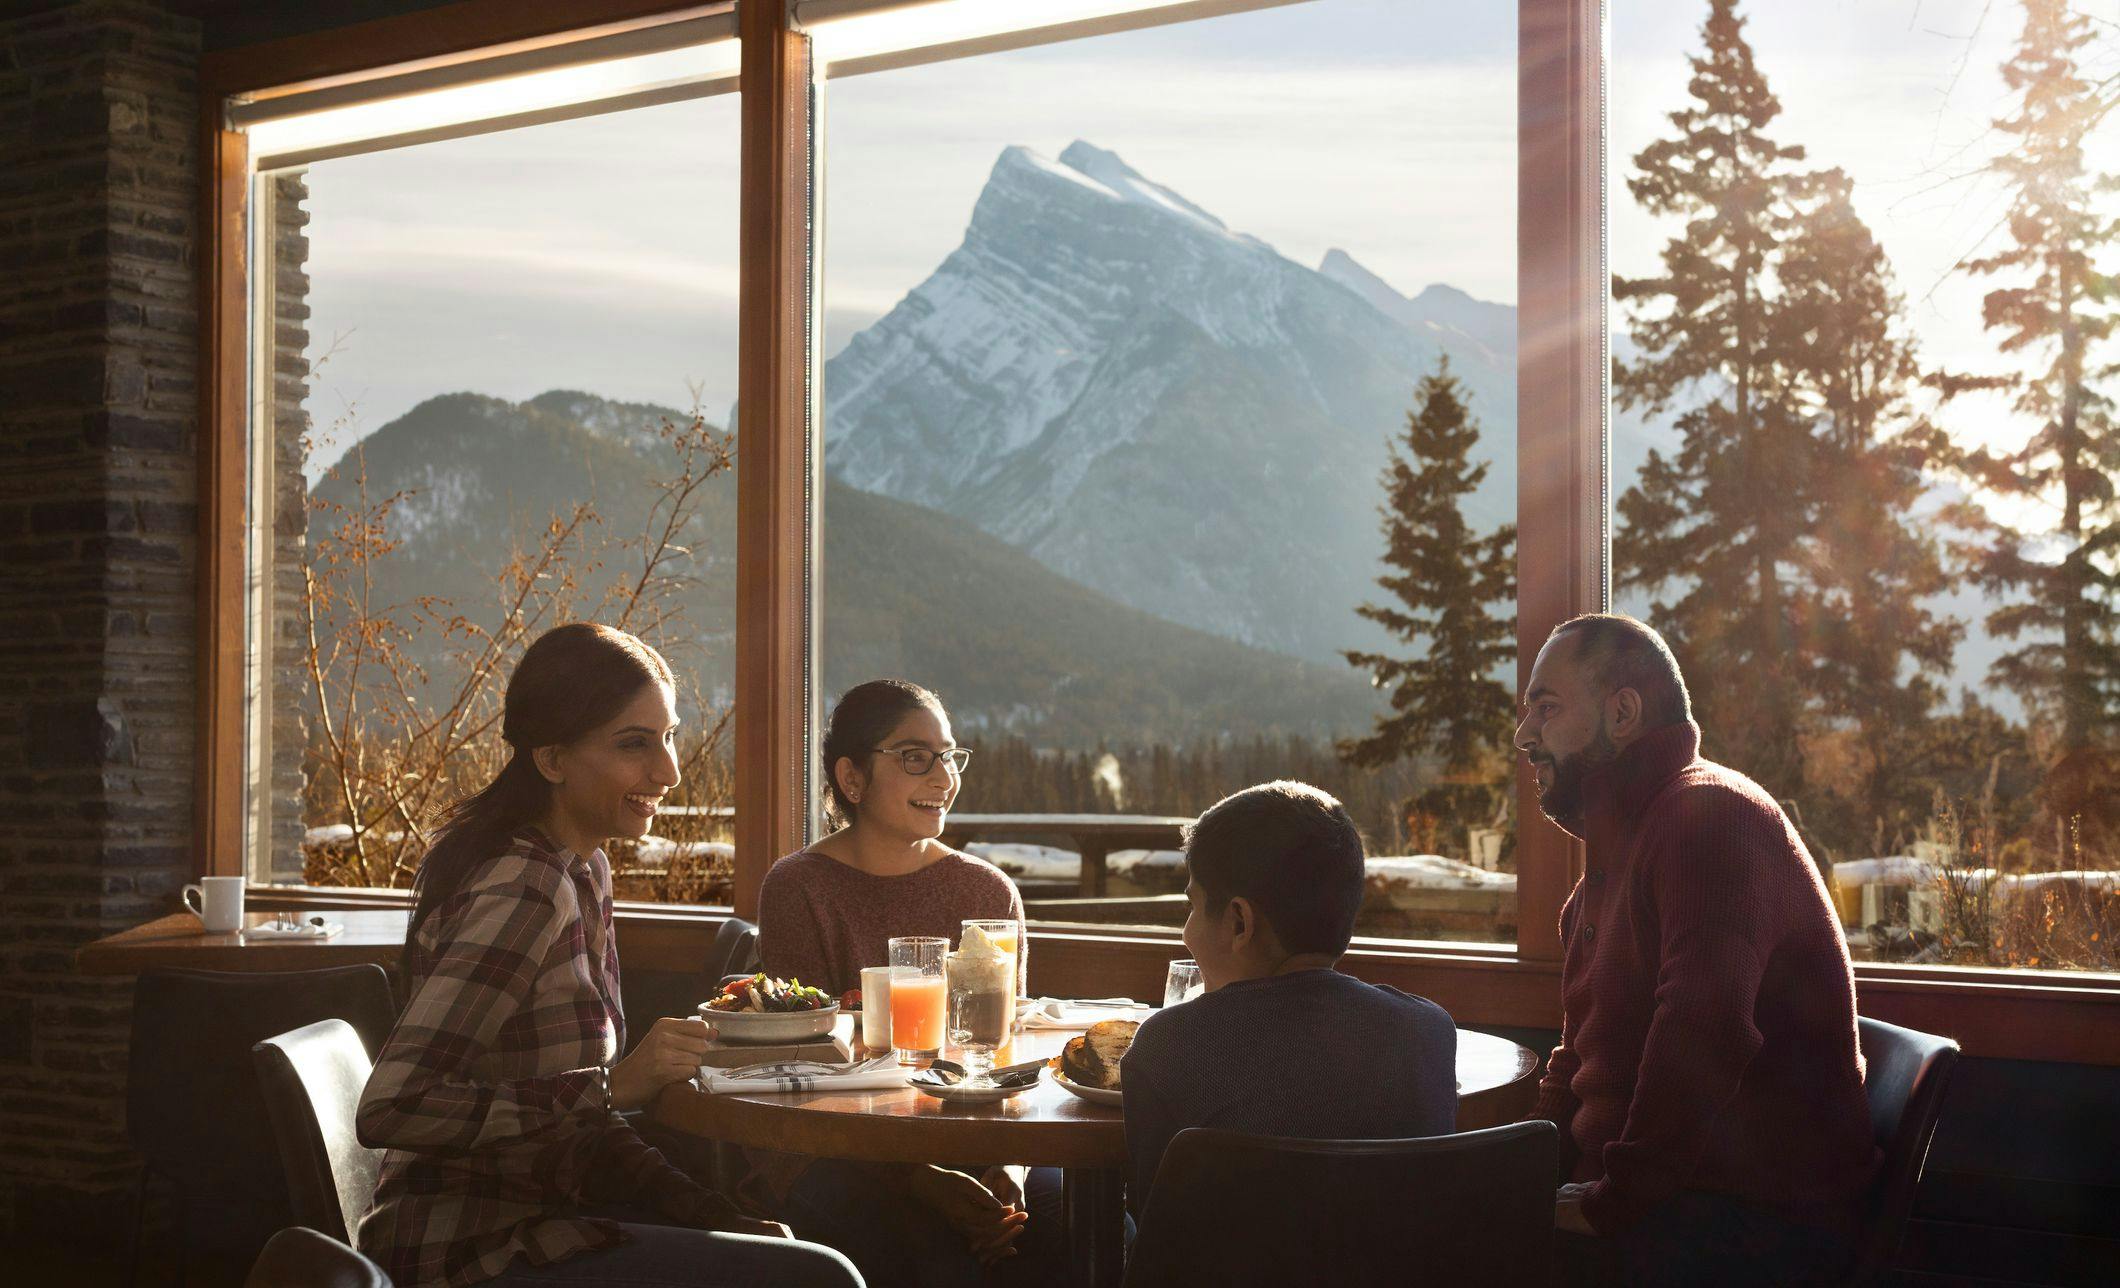 A family of four sit around a table laughing and enjoying brunch with views of a large mountain outside the window on a sunny day